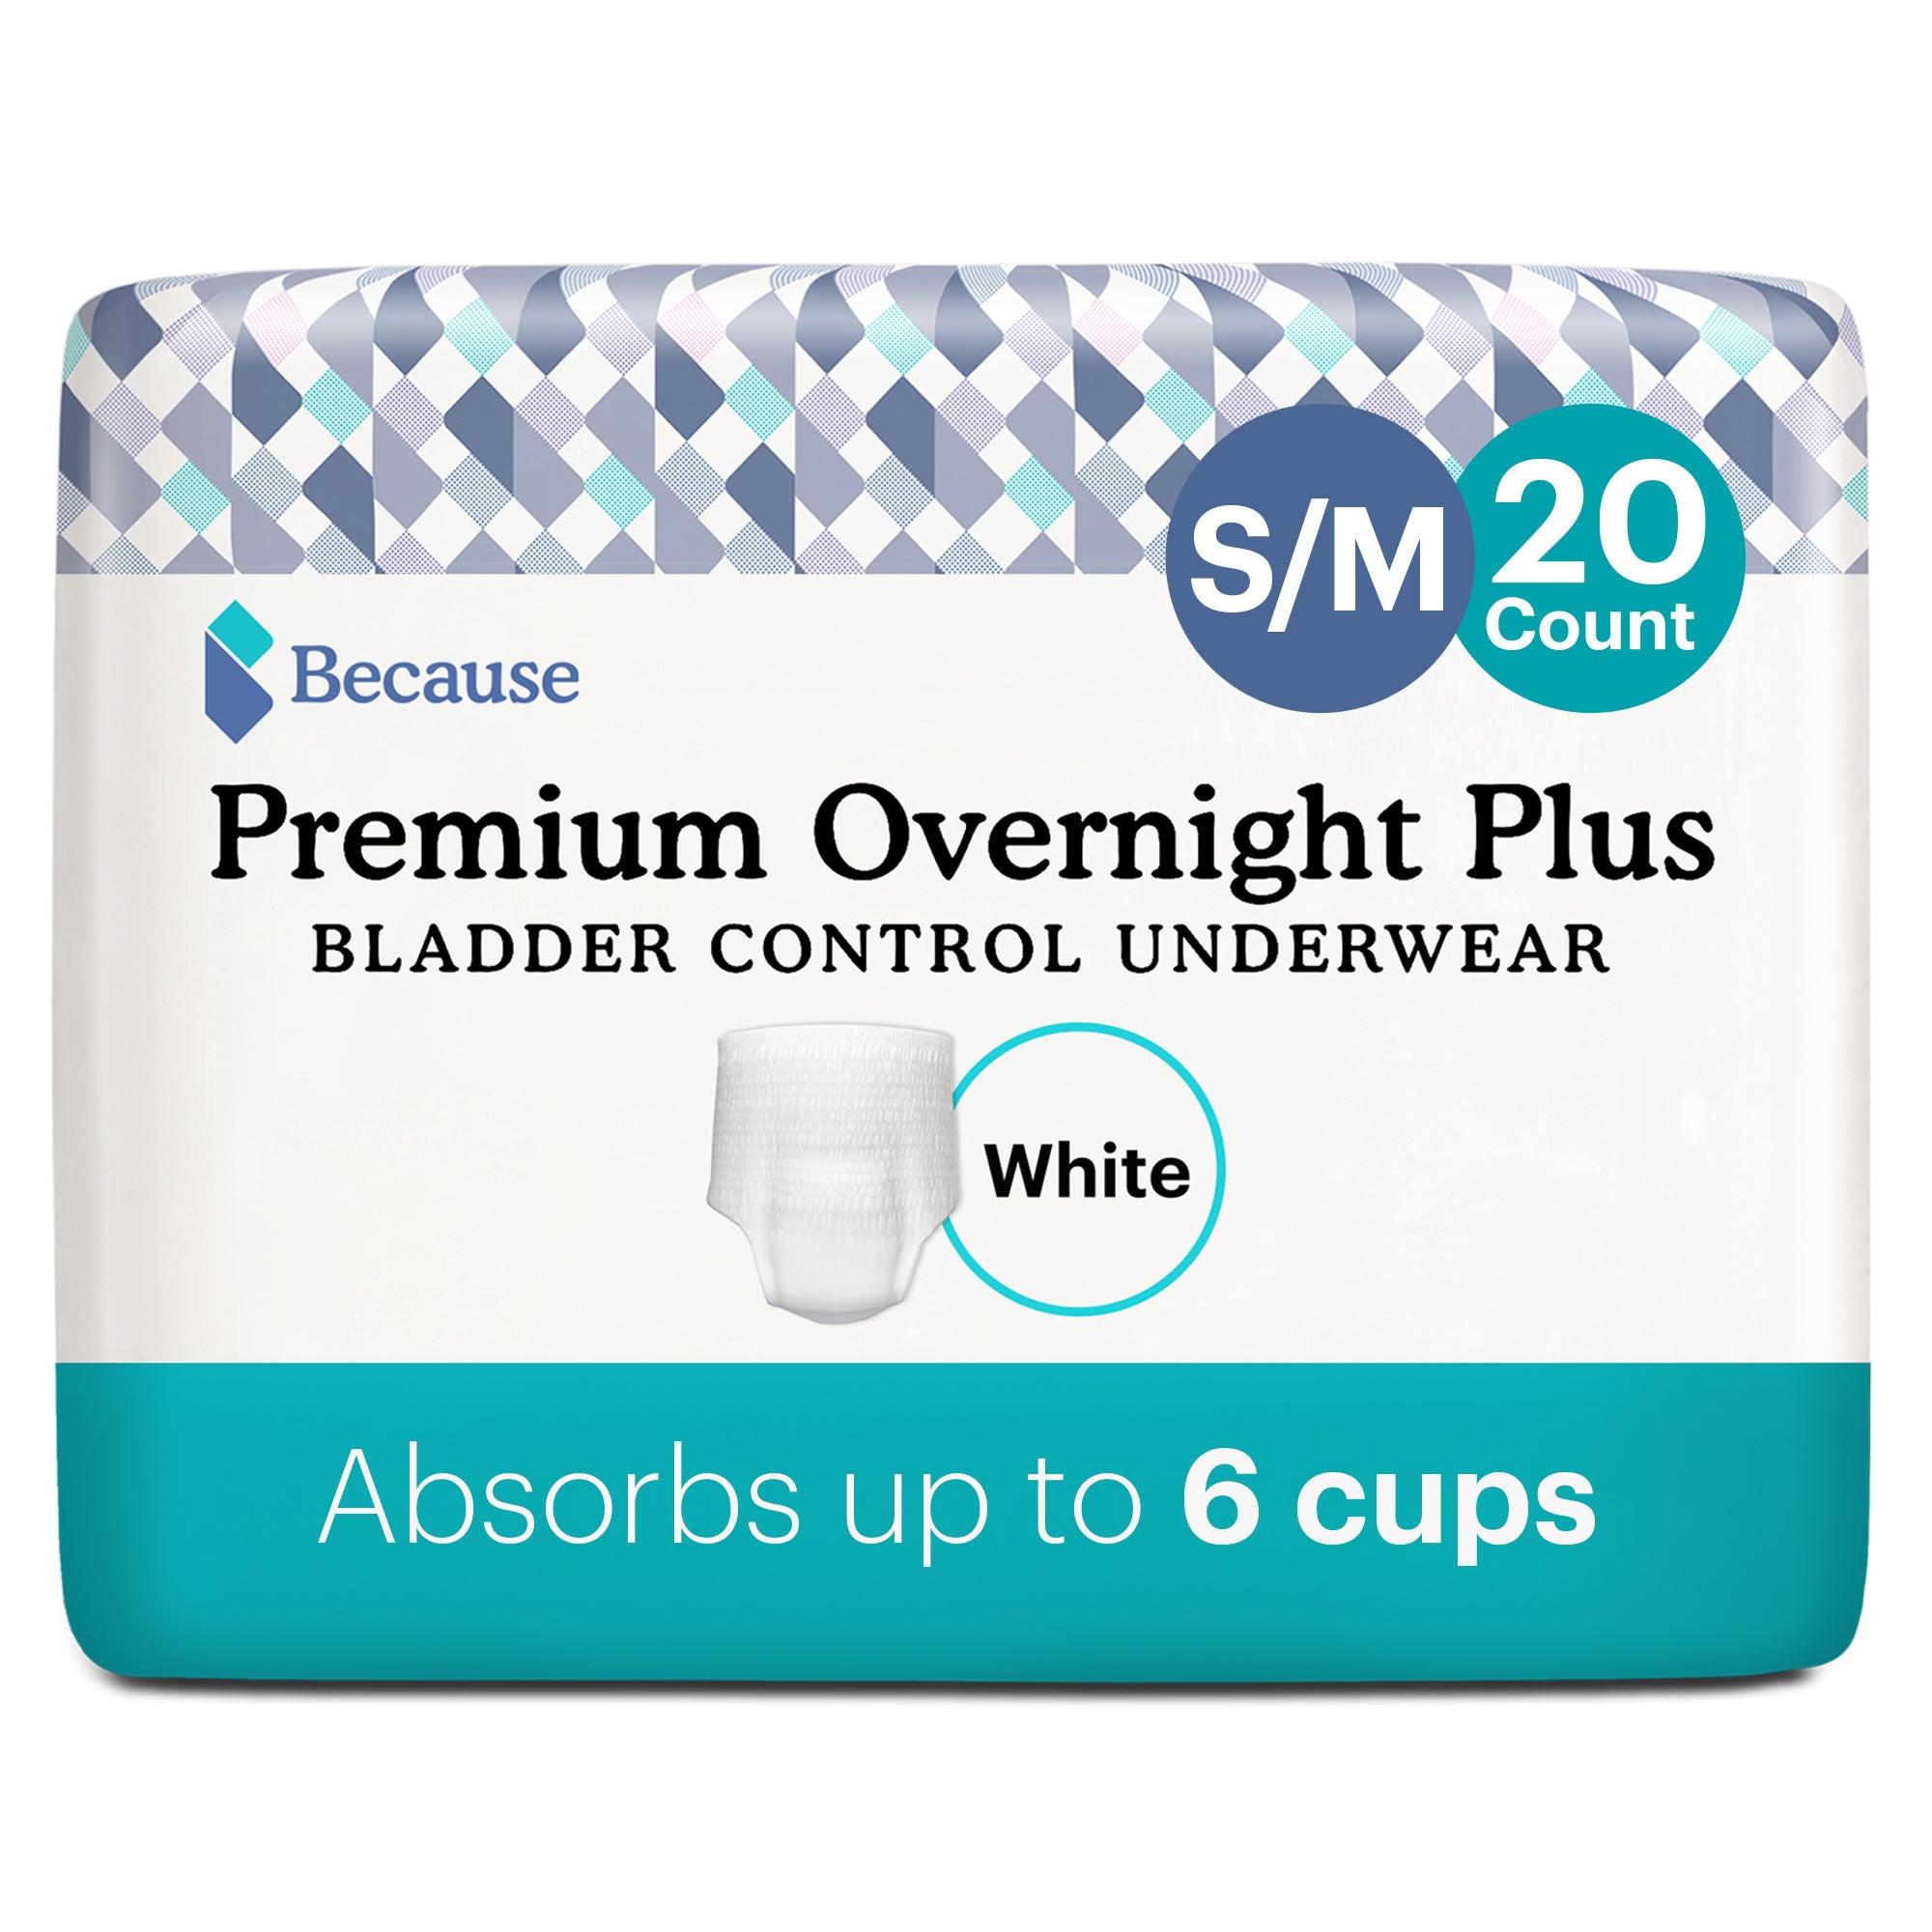 64 Count Assurance Men Incontinence Overnight Underwear Max Absorb Size L/XL